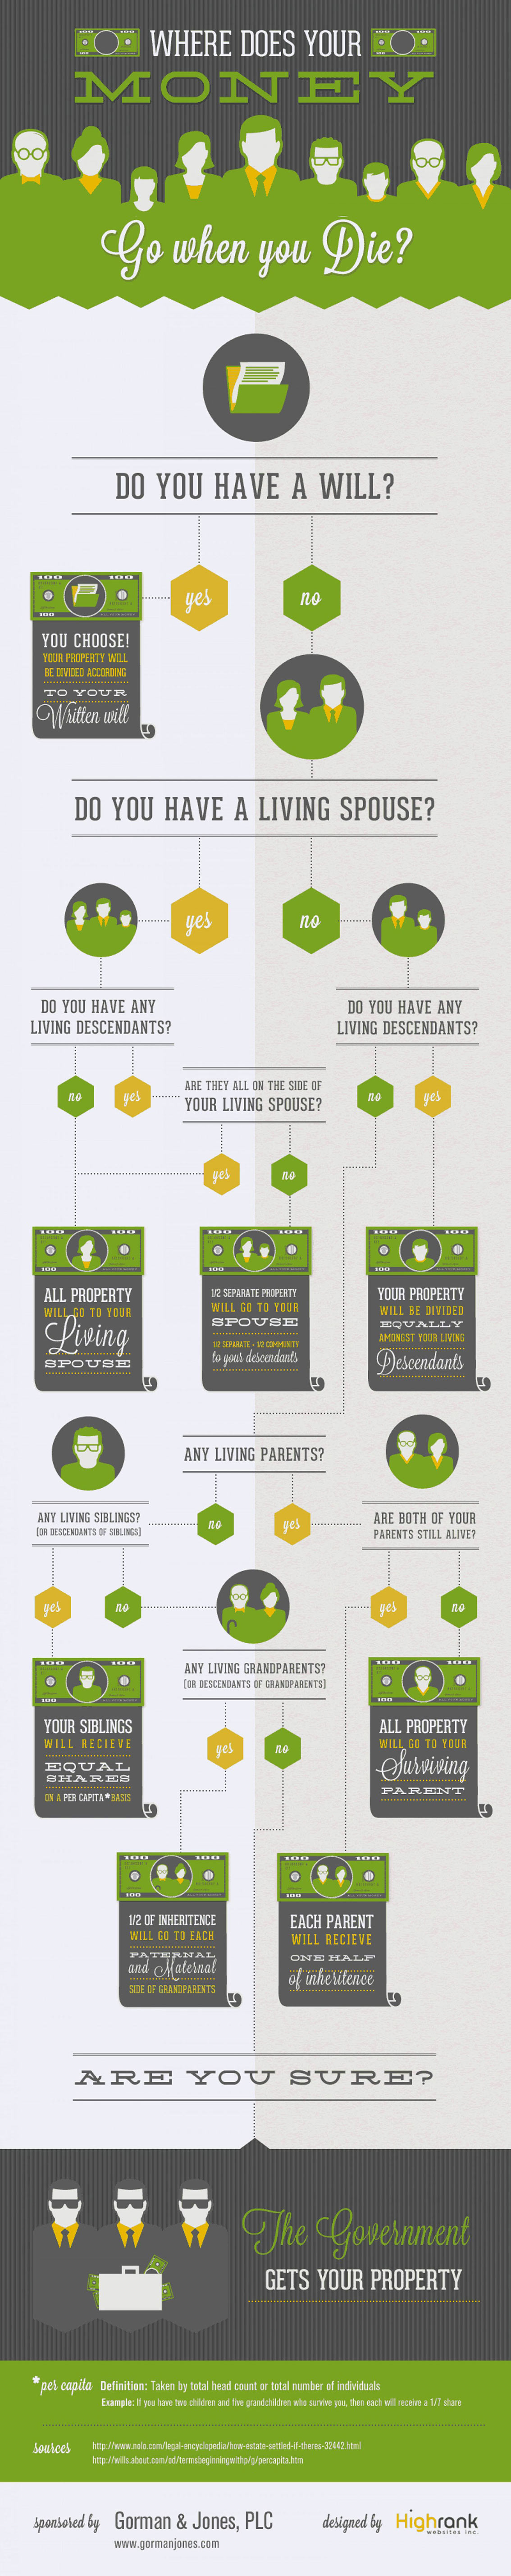 What Happens To My Money When I Die - Personal Finance Infographic